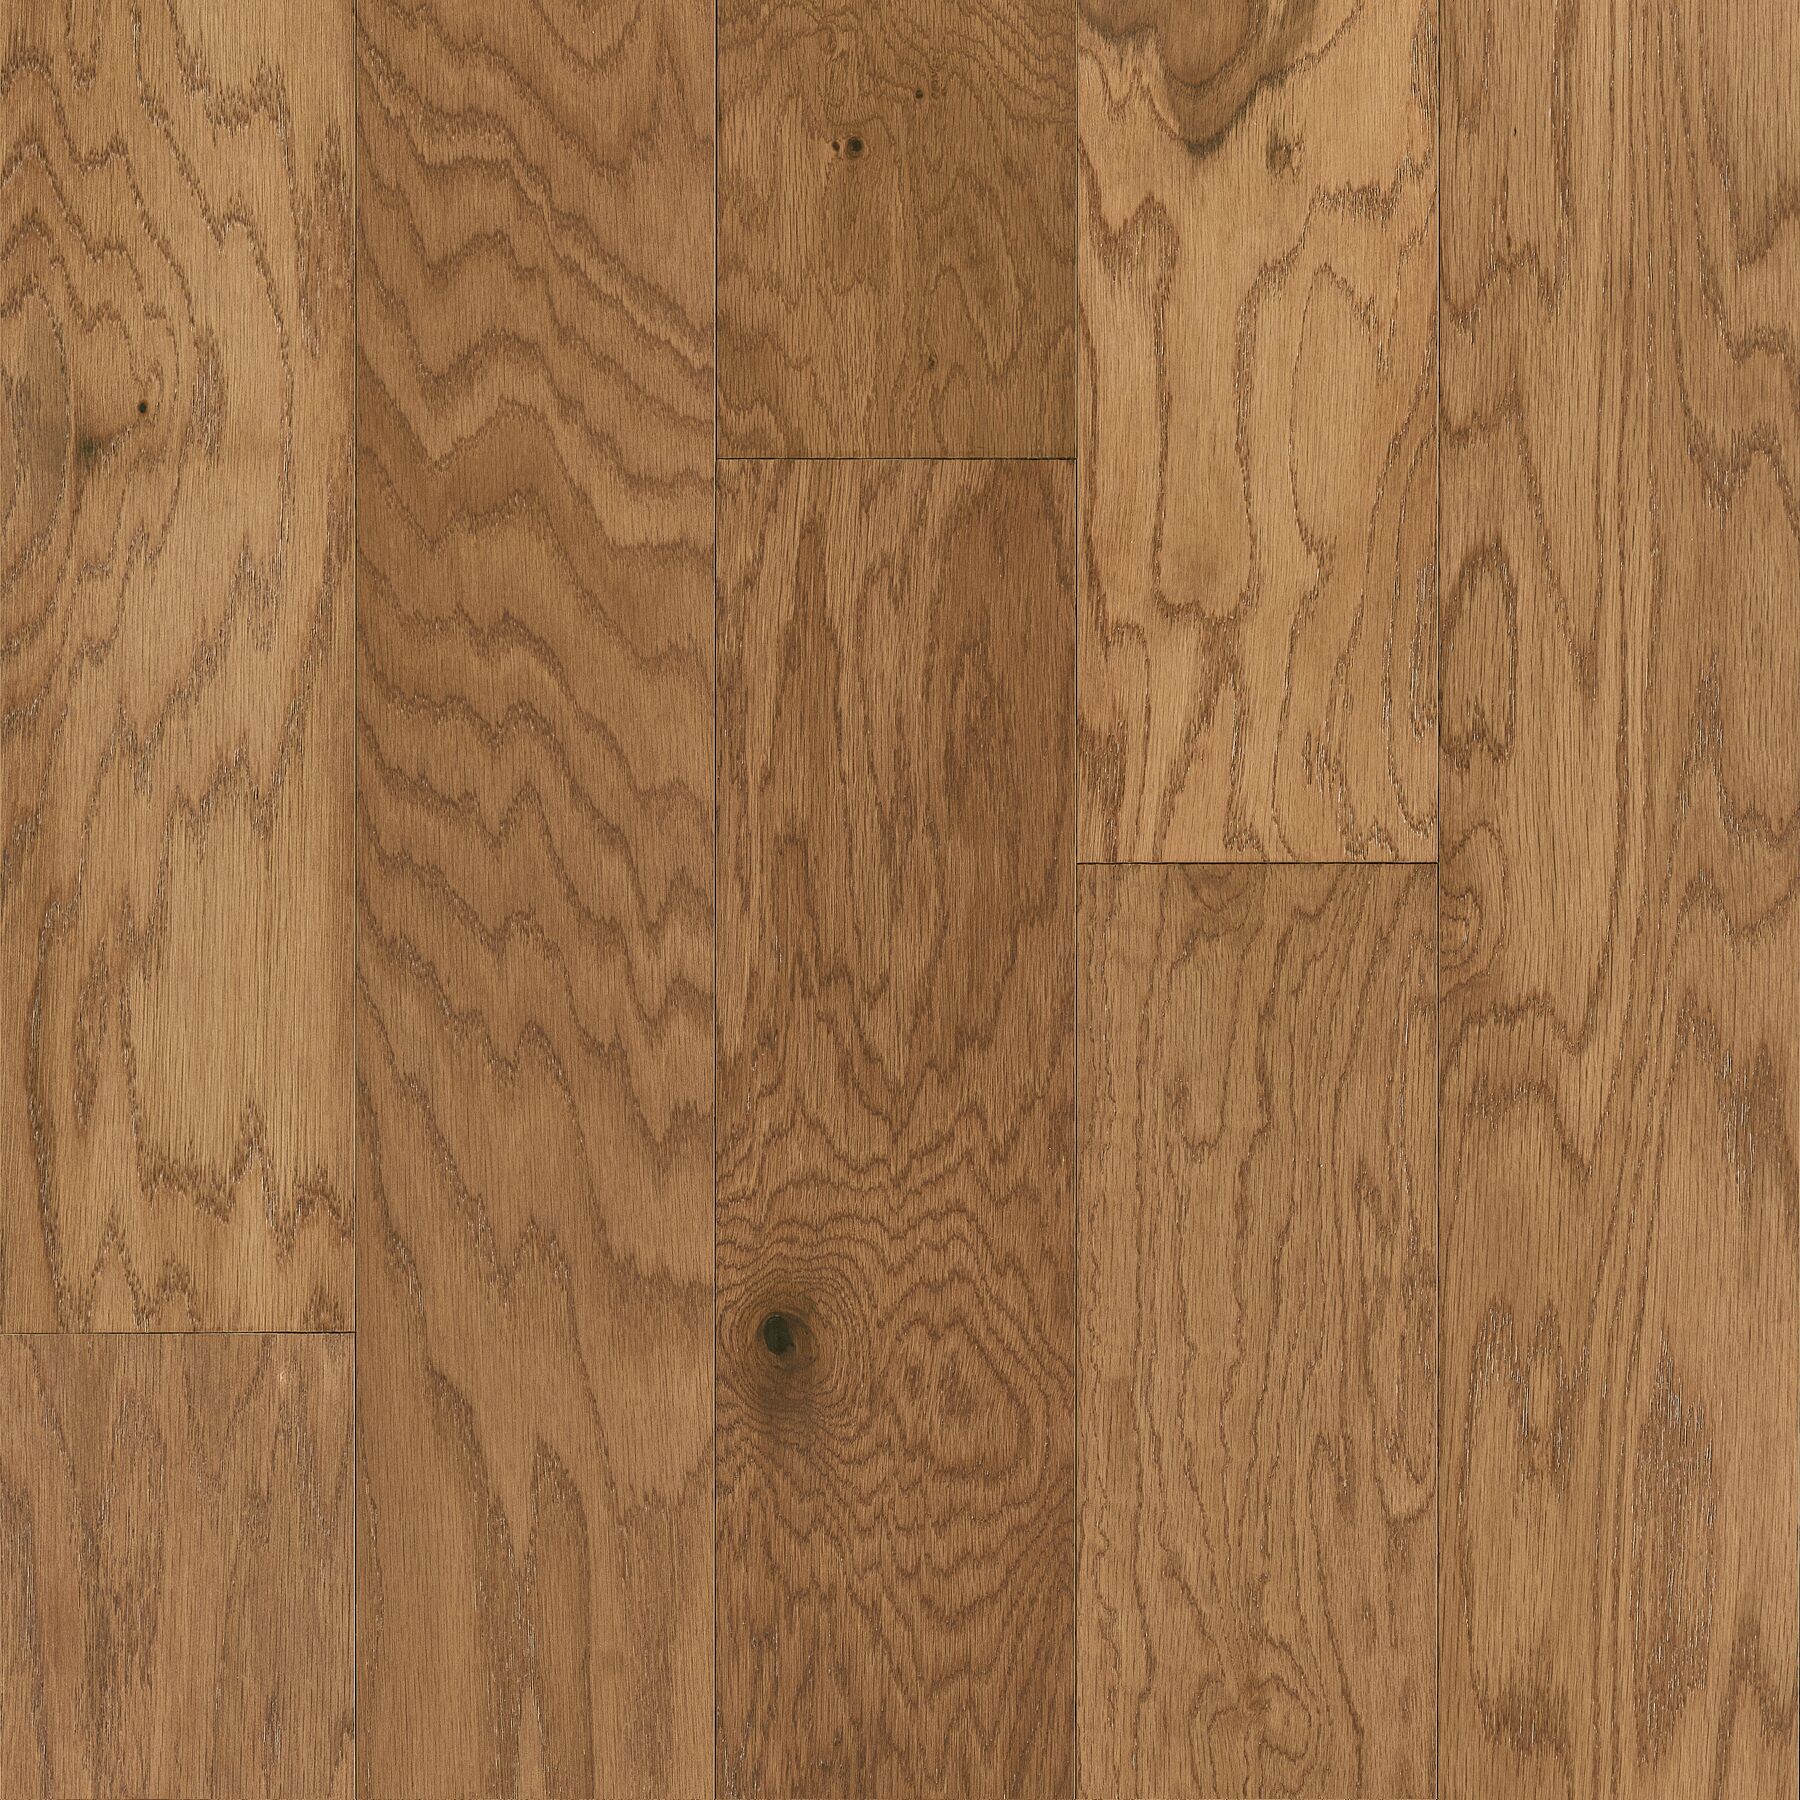 Callie Dogwood Densified Wood Flooring that's dog proof with hardened wood